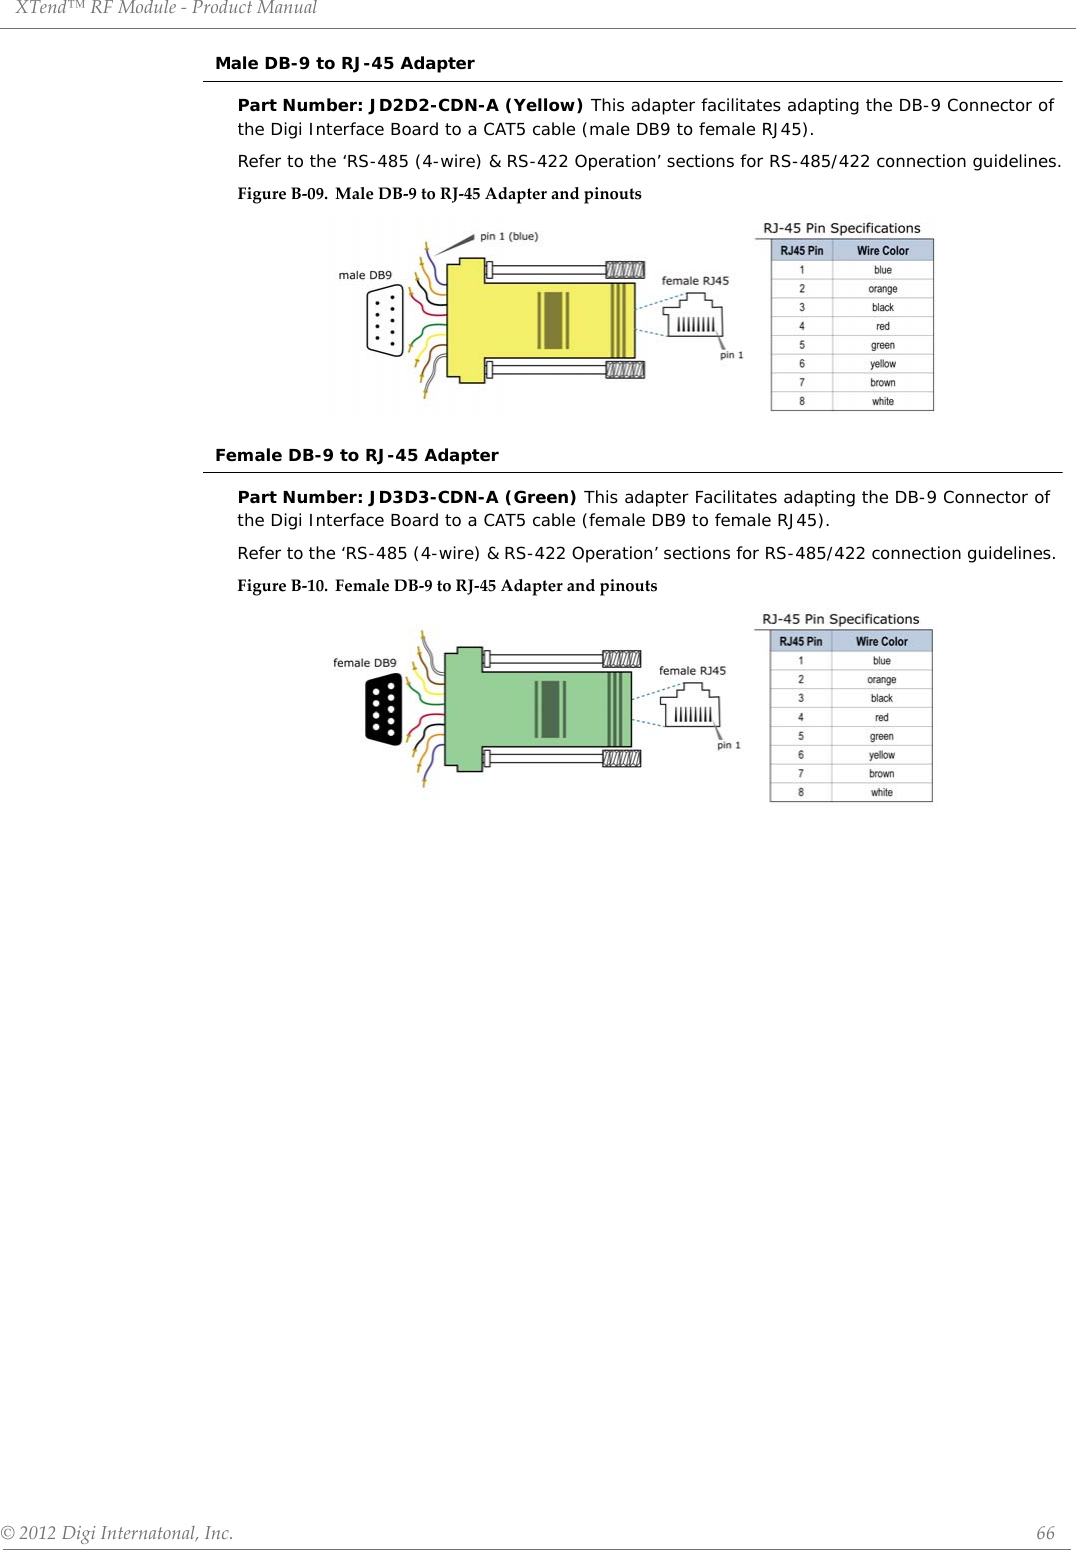 XTend™ RF Module - Product Manual © 2012 Digi Internatonal, Inc.      66Male DB-9 to RJ-45 AdapterPart Number: JD2D2-CDN-A (Yellow) This adapter facilitates adapting the DB-9 Connector of the Digi Interface Board to a CAT5 cable (male DB9 to female RJ45).Refer to the ‘RS-485 (4-wire) &amp; RS-422 Operation’ sections for RS-485/422 connection guidelines.Figure B-09. Male DB-9 to RJ-45 Adapter and pinoutsFemale DB-9 to RJ-45 AdapterPart Number: JD3D3-CDN-A (Green) This adapter Facilitates adapting the DB-9 Connector of the Digi Interface Board to a CAT5 cable (female DB9 to female RJ45).Refer to the ‘RS-485 (4-wire) &amp; RS-422 Operation’ sections for RS-485/422 connection guidelines. Figure B-10. Female DB-9 to RJ-45 Adapter and pinouts